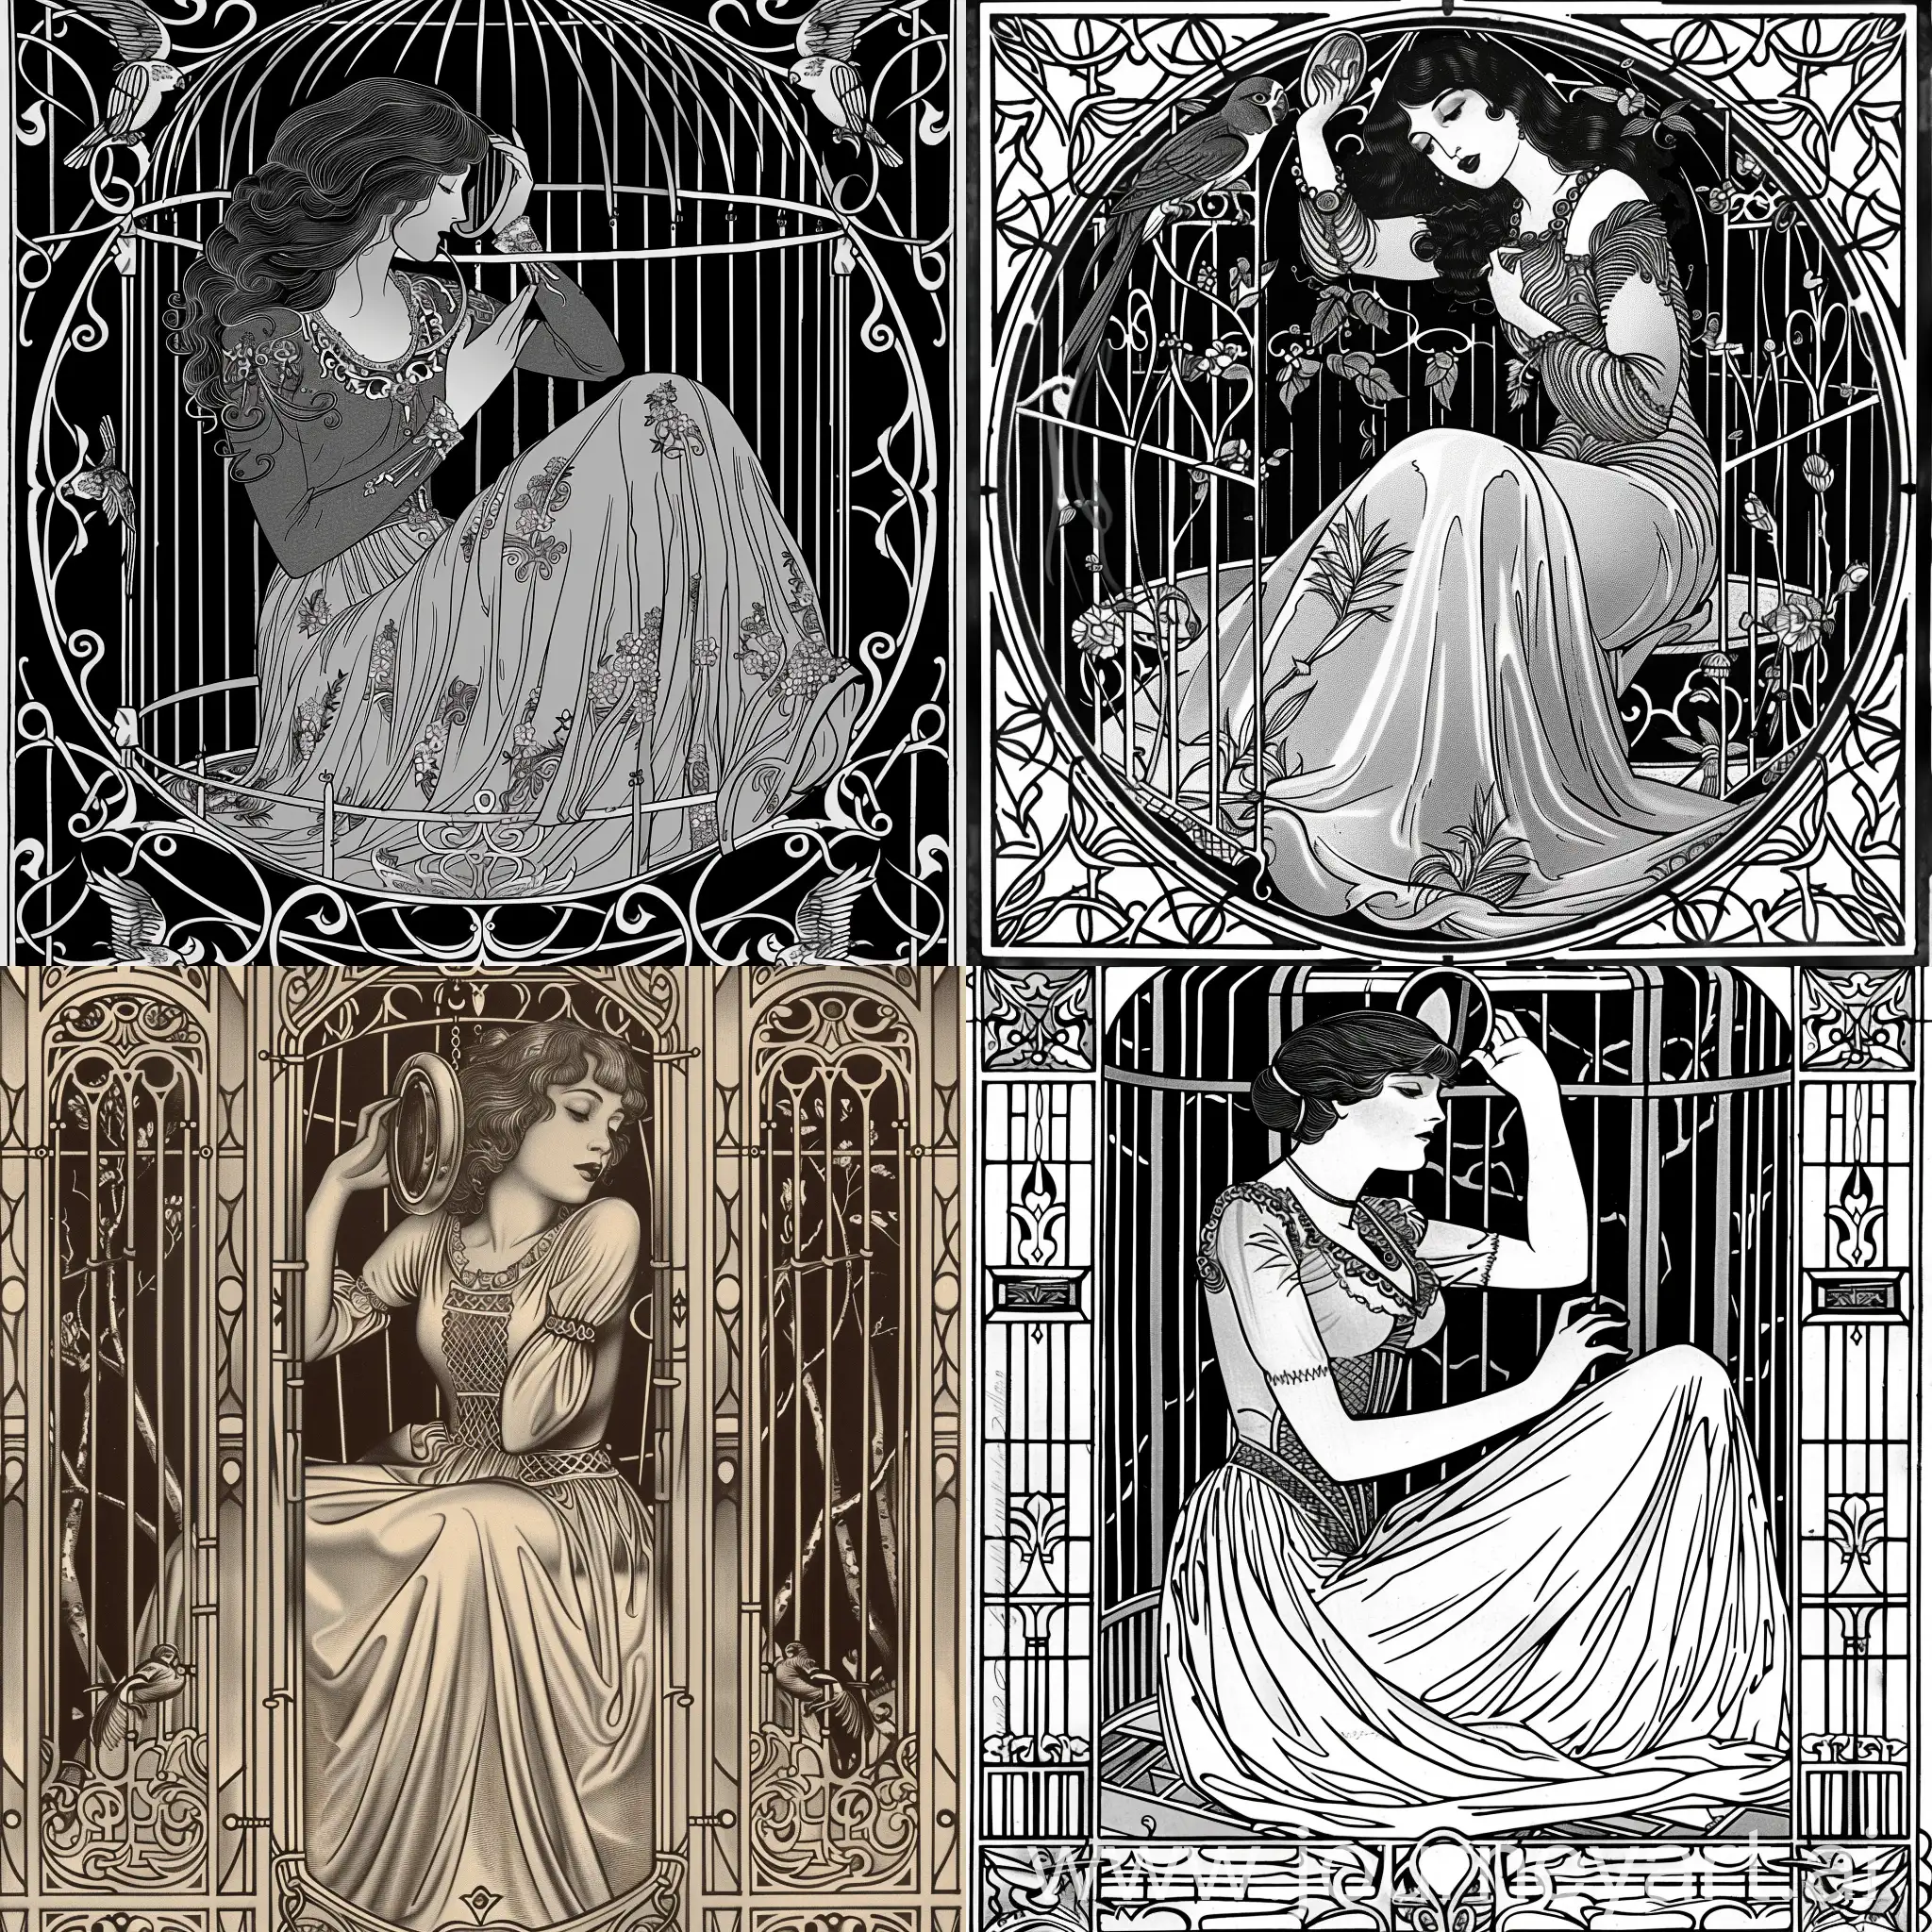 an illustration of a woman with a long dress, holding a mirror to her face whilst sitting inside of a birdcage, in the Art Nouveau style of Aubrey Beardsley